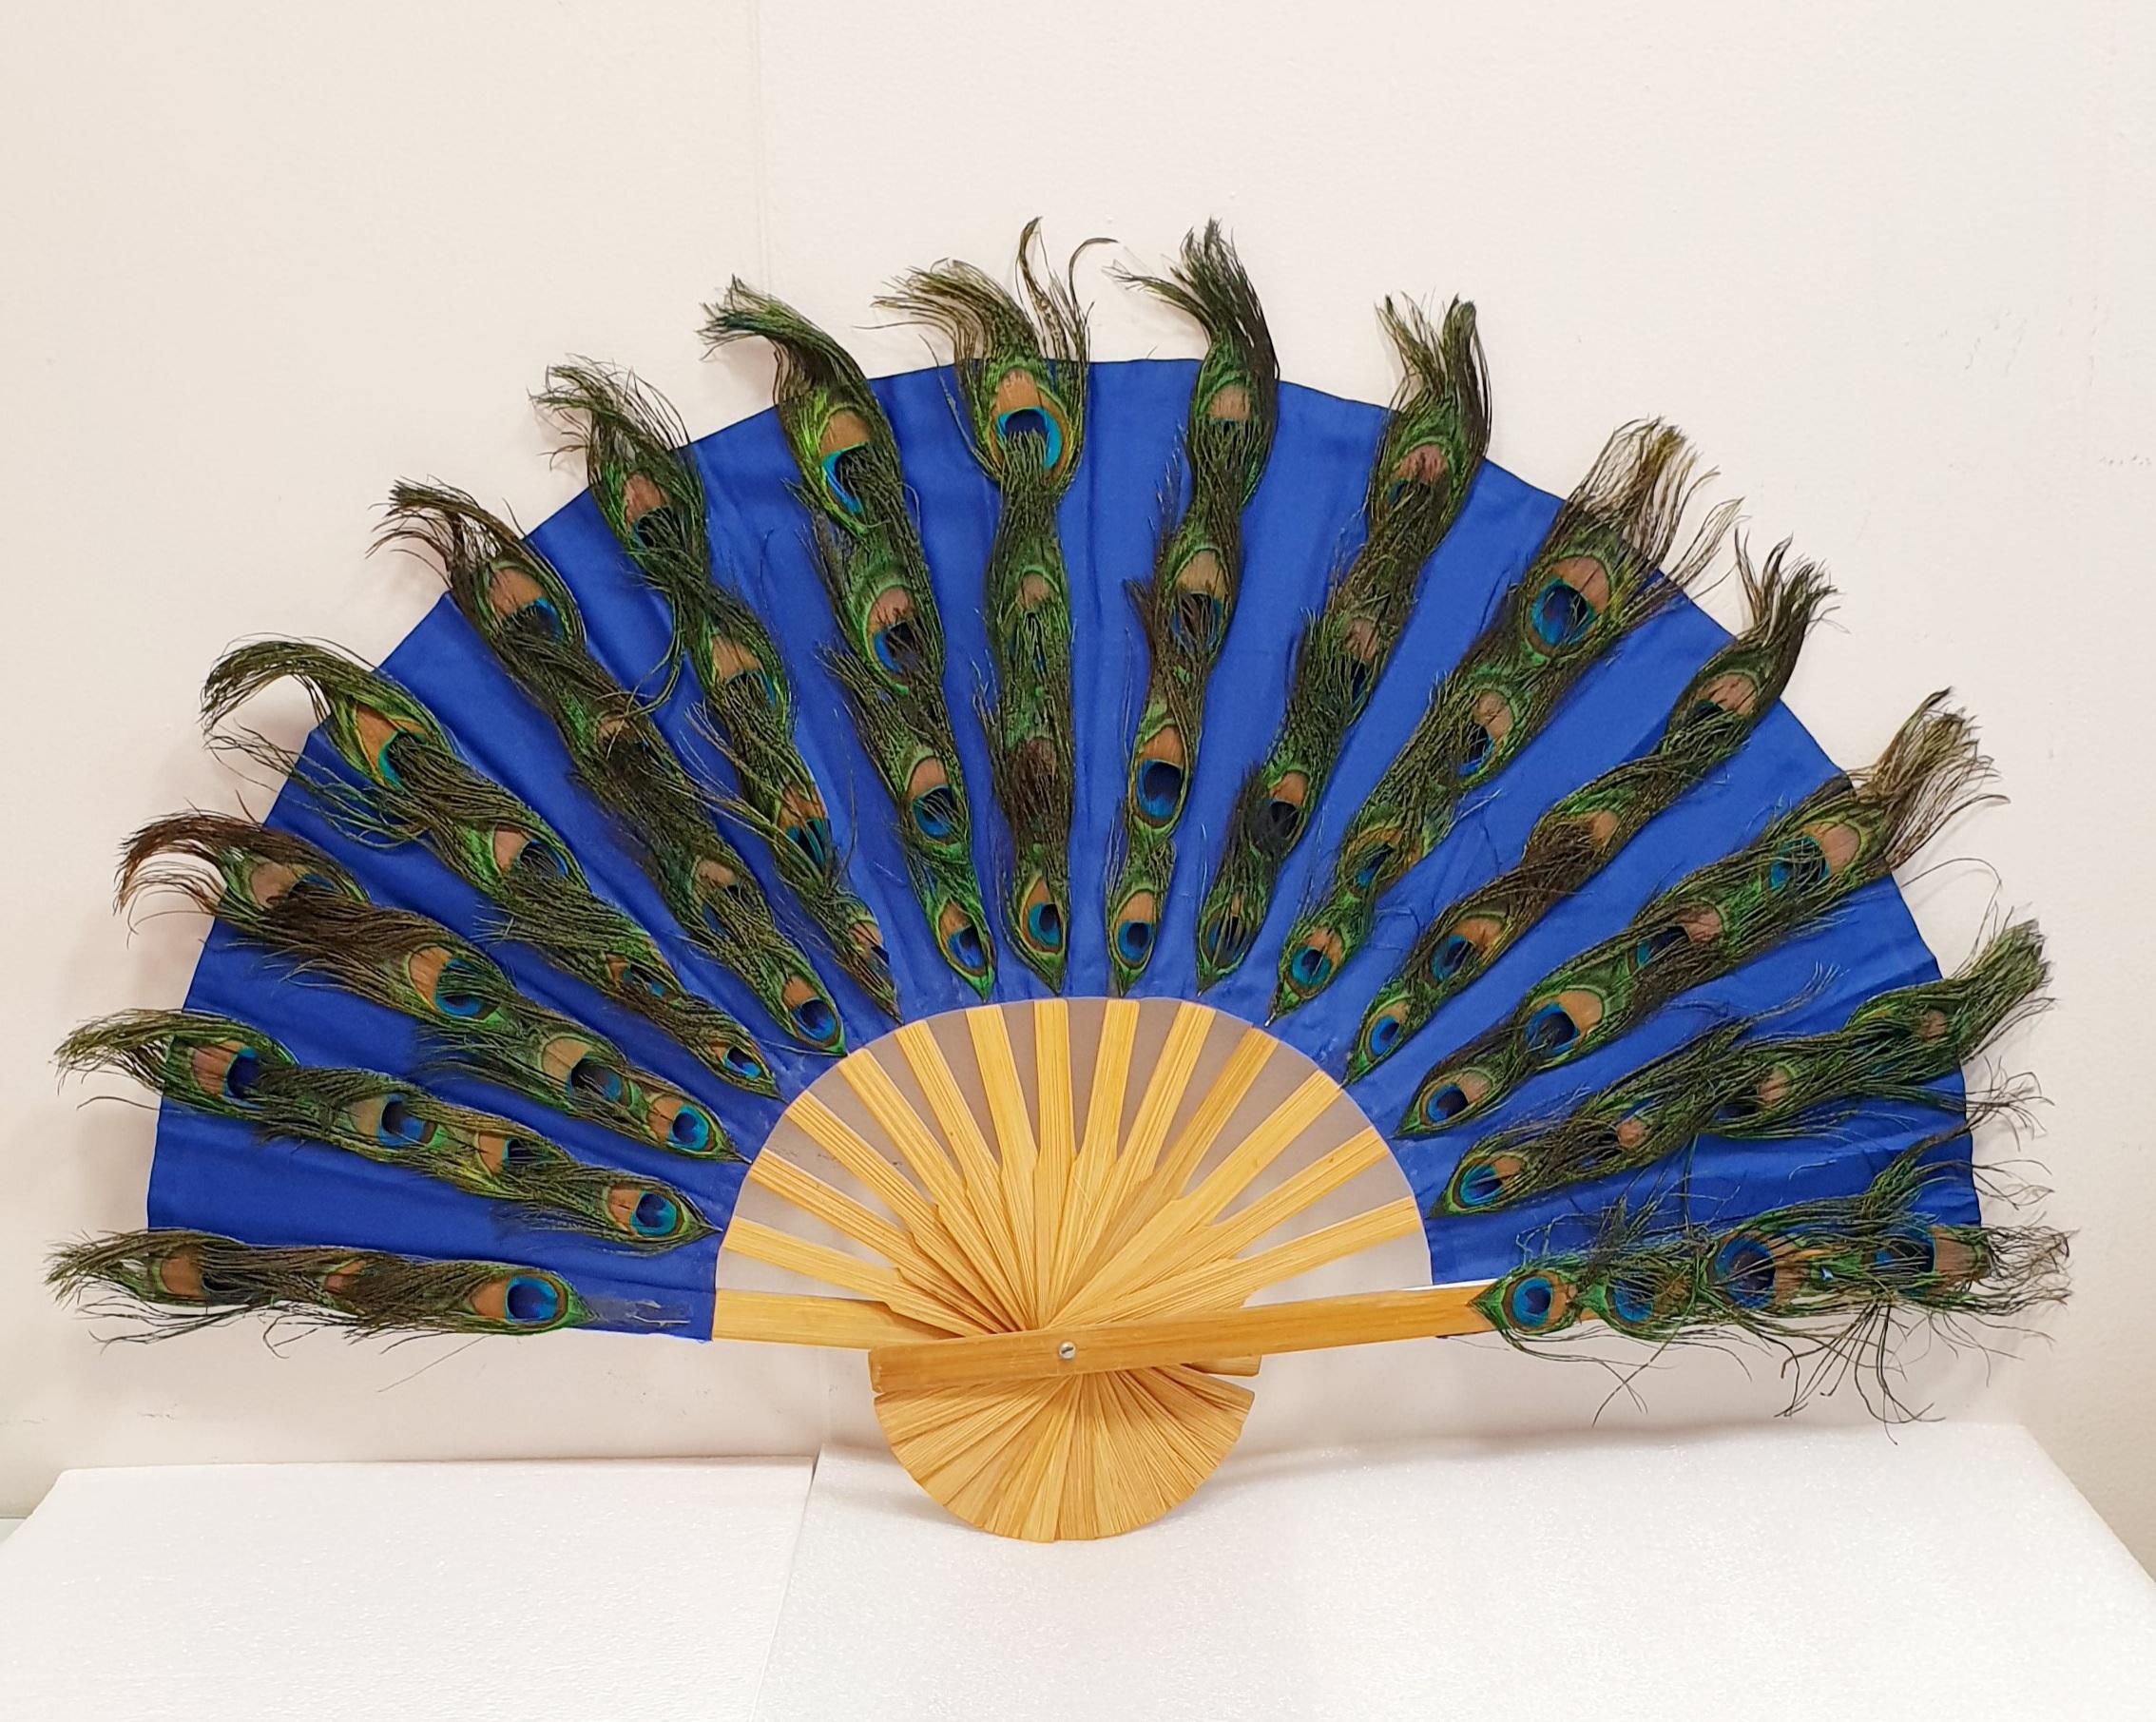 Medium Peacok Feathers Fan in natural barnished pine wood   Open 60cm X 30cm / 23,62in x 11,81in
Ideal for cocktails and galas, for dancing and for breezing in hot weather.  In stock 6 
Perfect Condition.  Also for decoration or retail window shops.